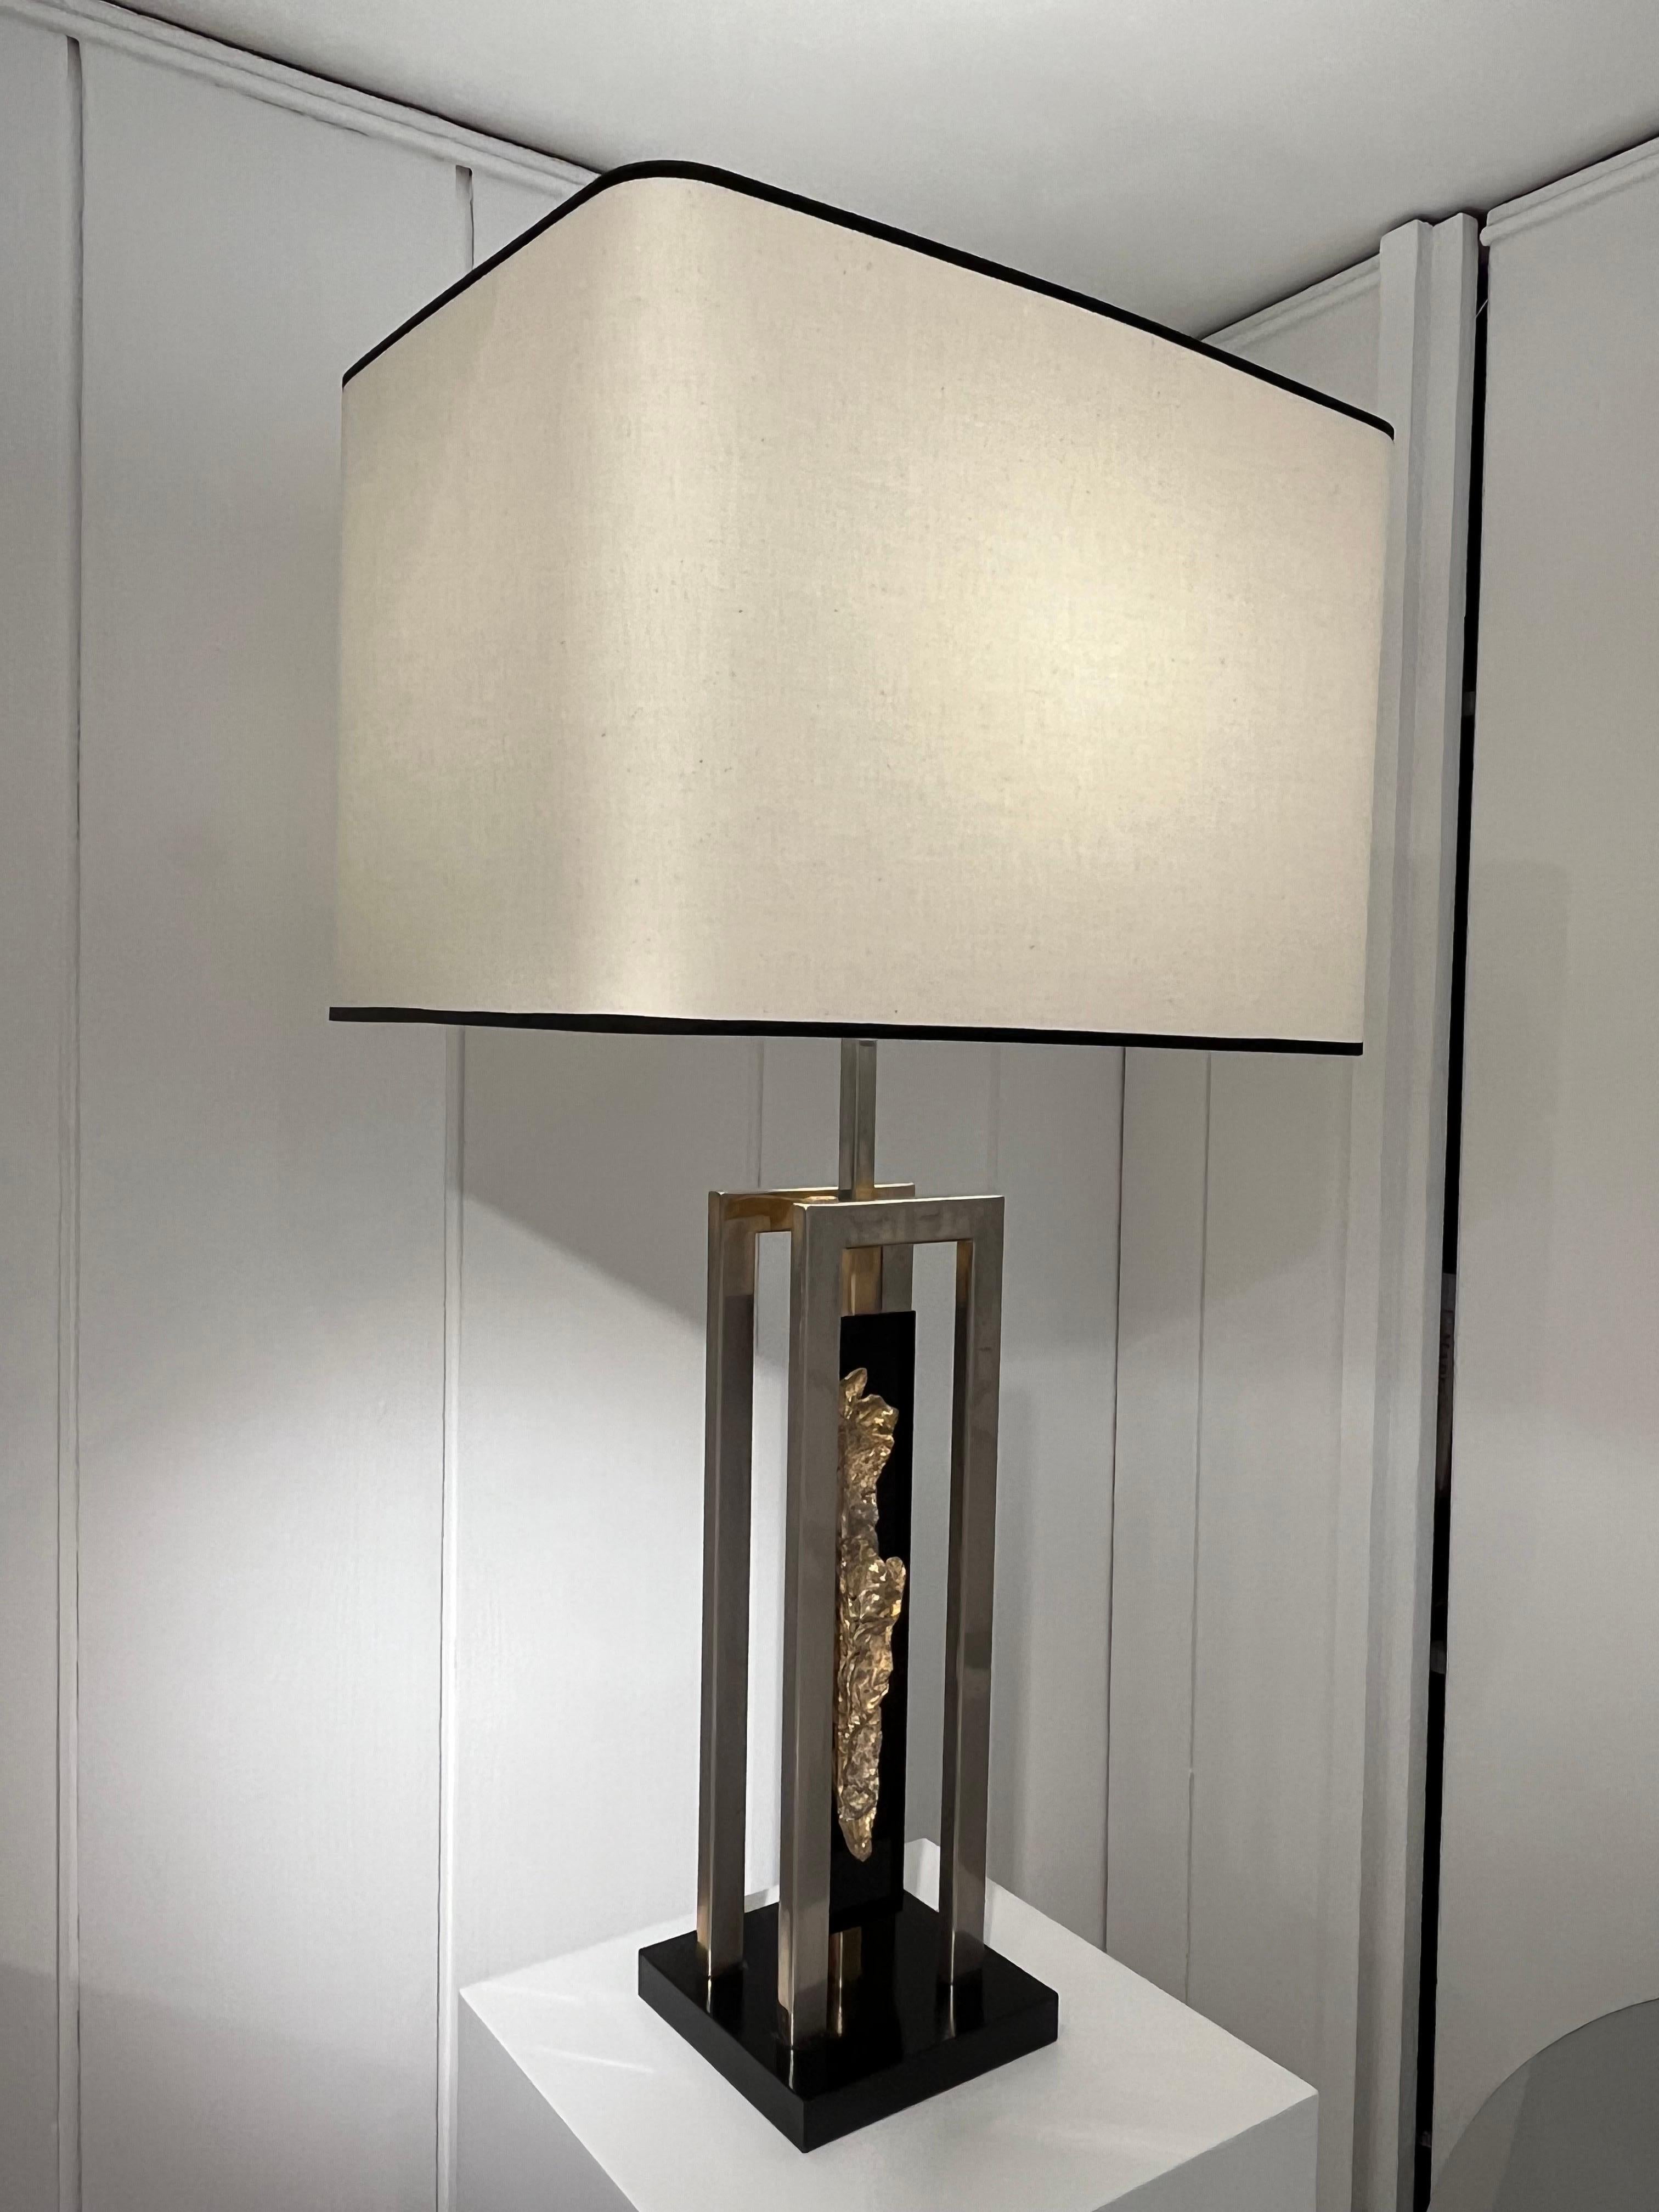 Vintage table lamp in chromed steel and brass sculpture monted on lucite
Designd by Philippe Cheverny
New lamp shade.

